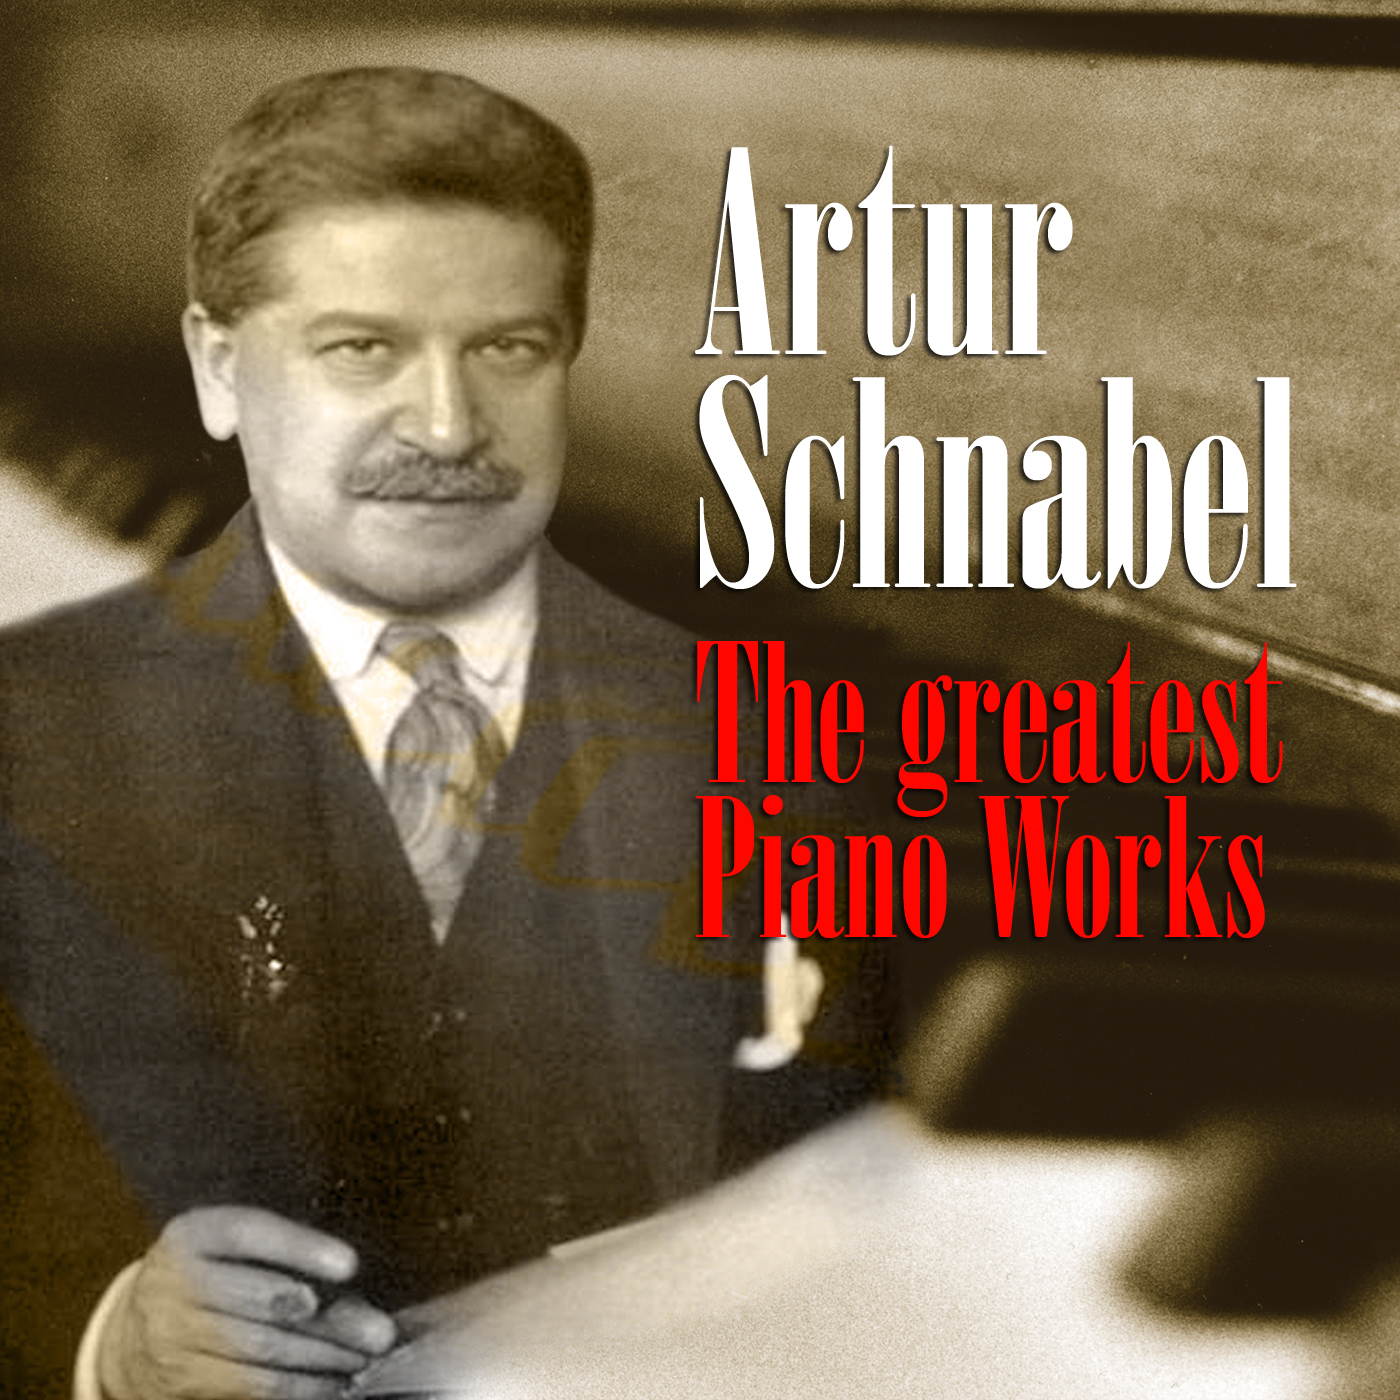 The Greatest Piano Works